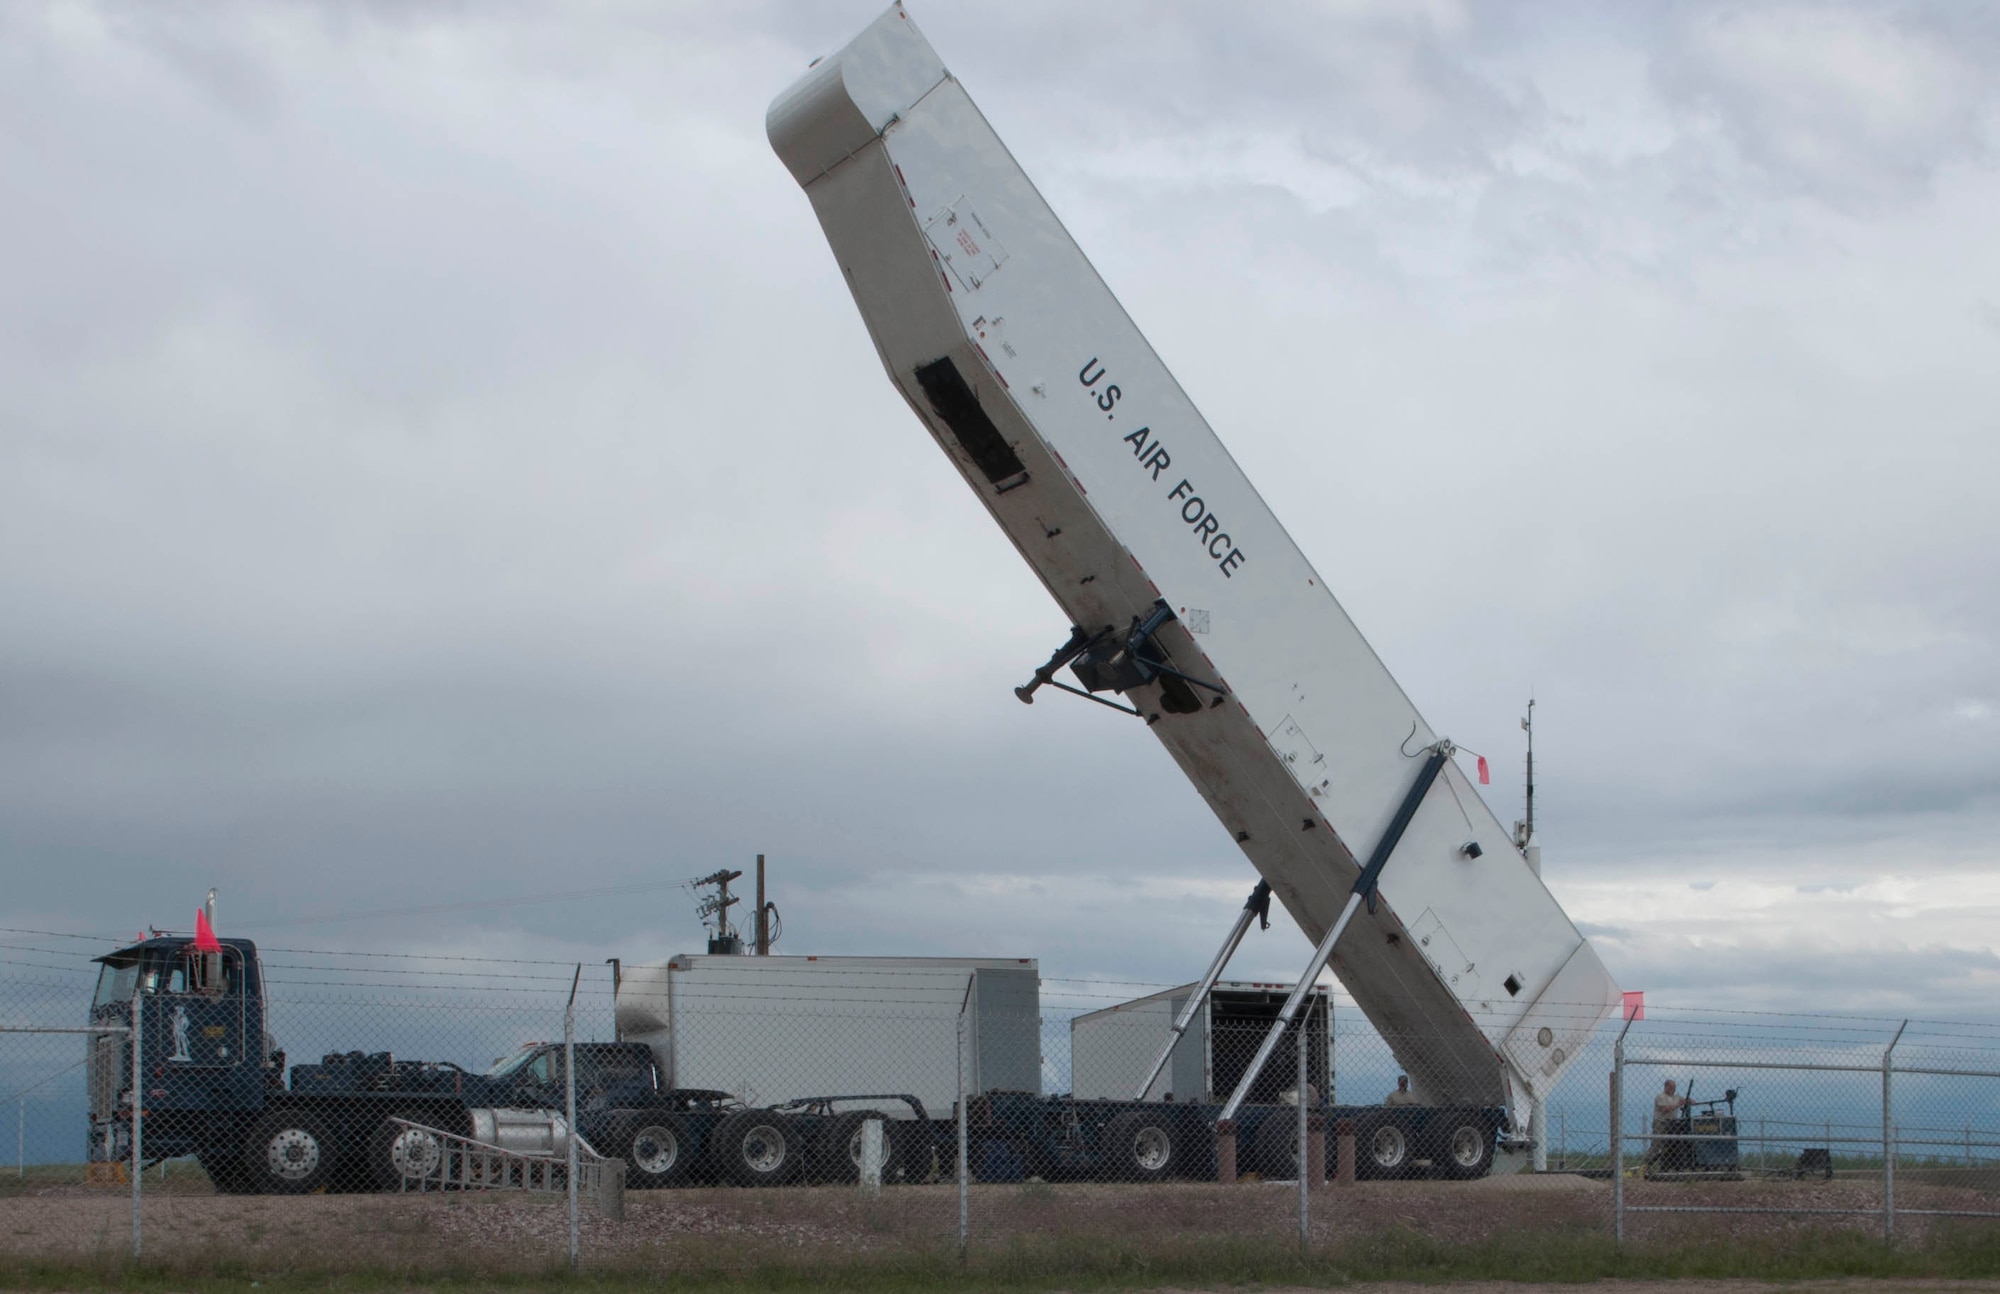 A transporter erector attached to a payload transporter is raised in the 90th Missile Wing missile complex, June 6, 2017. The TE was stood up to prepare for the removal of a missile from the ground. The missile was removed to comply with the New START Treaty agreement with Russia. The Air Force met their NST requirements when the 50th Minuteman III Intercontinental Ballistic Missile was removed from a silo in the 90th MW missile complex. (U.S. Air Force photo by Airman 1st Class Breanna Carter)